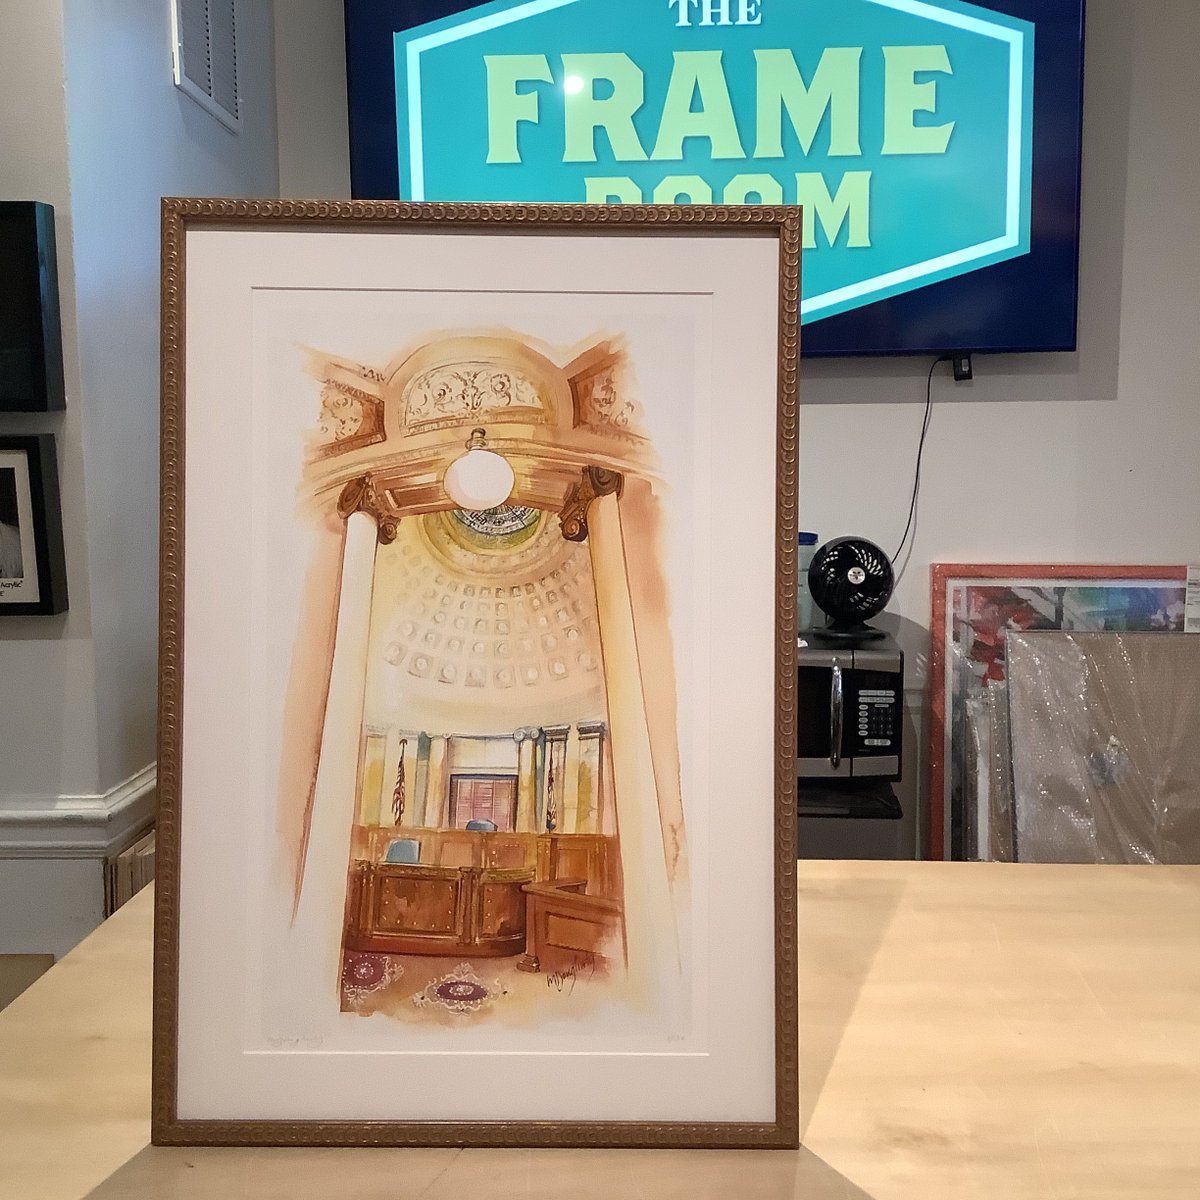 Thinking of getting something framed? No need to deliberate, come on down!

#theframeroom #customframes #customframing #customframer #customframeshop #frameshop #fellspoint #baltimore #watercolor #art